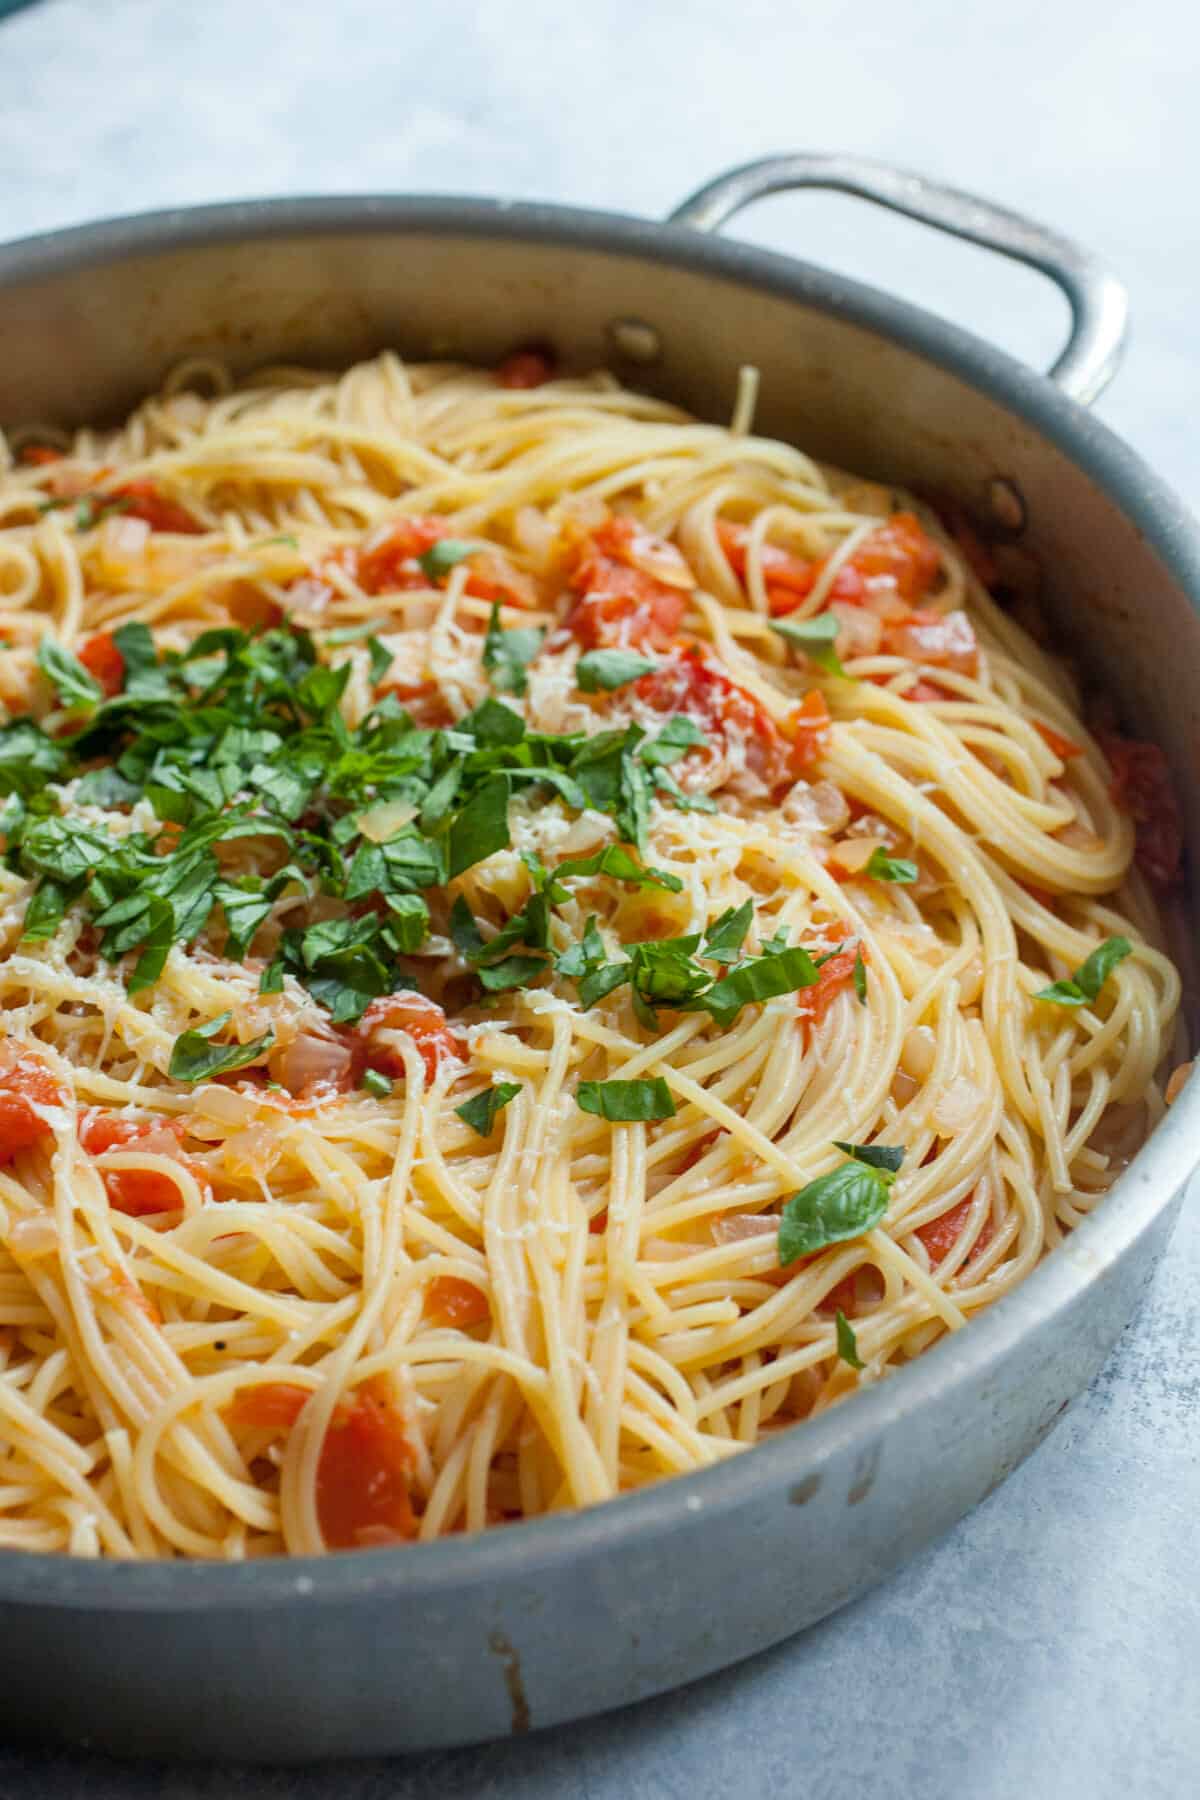 Cherry Tomato Spaghetti: This simple fresh spaghetti dish is made with cherry tomatoes that are super fresh and easy to cook down. It's a huge hit! | macheesmo.com